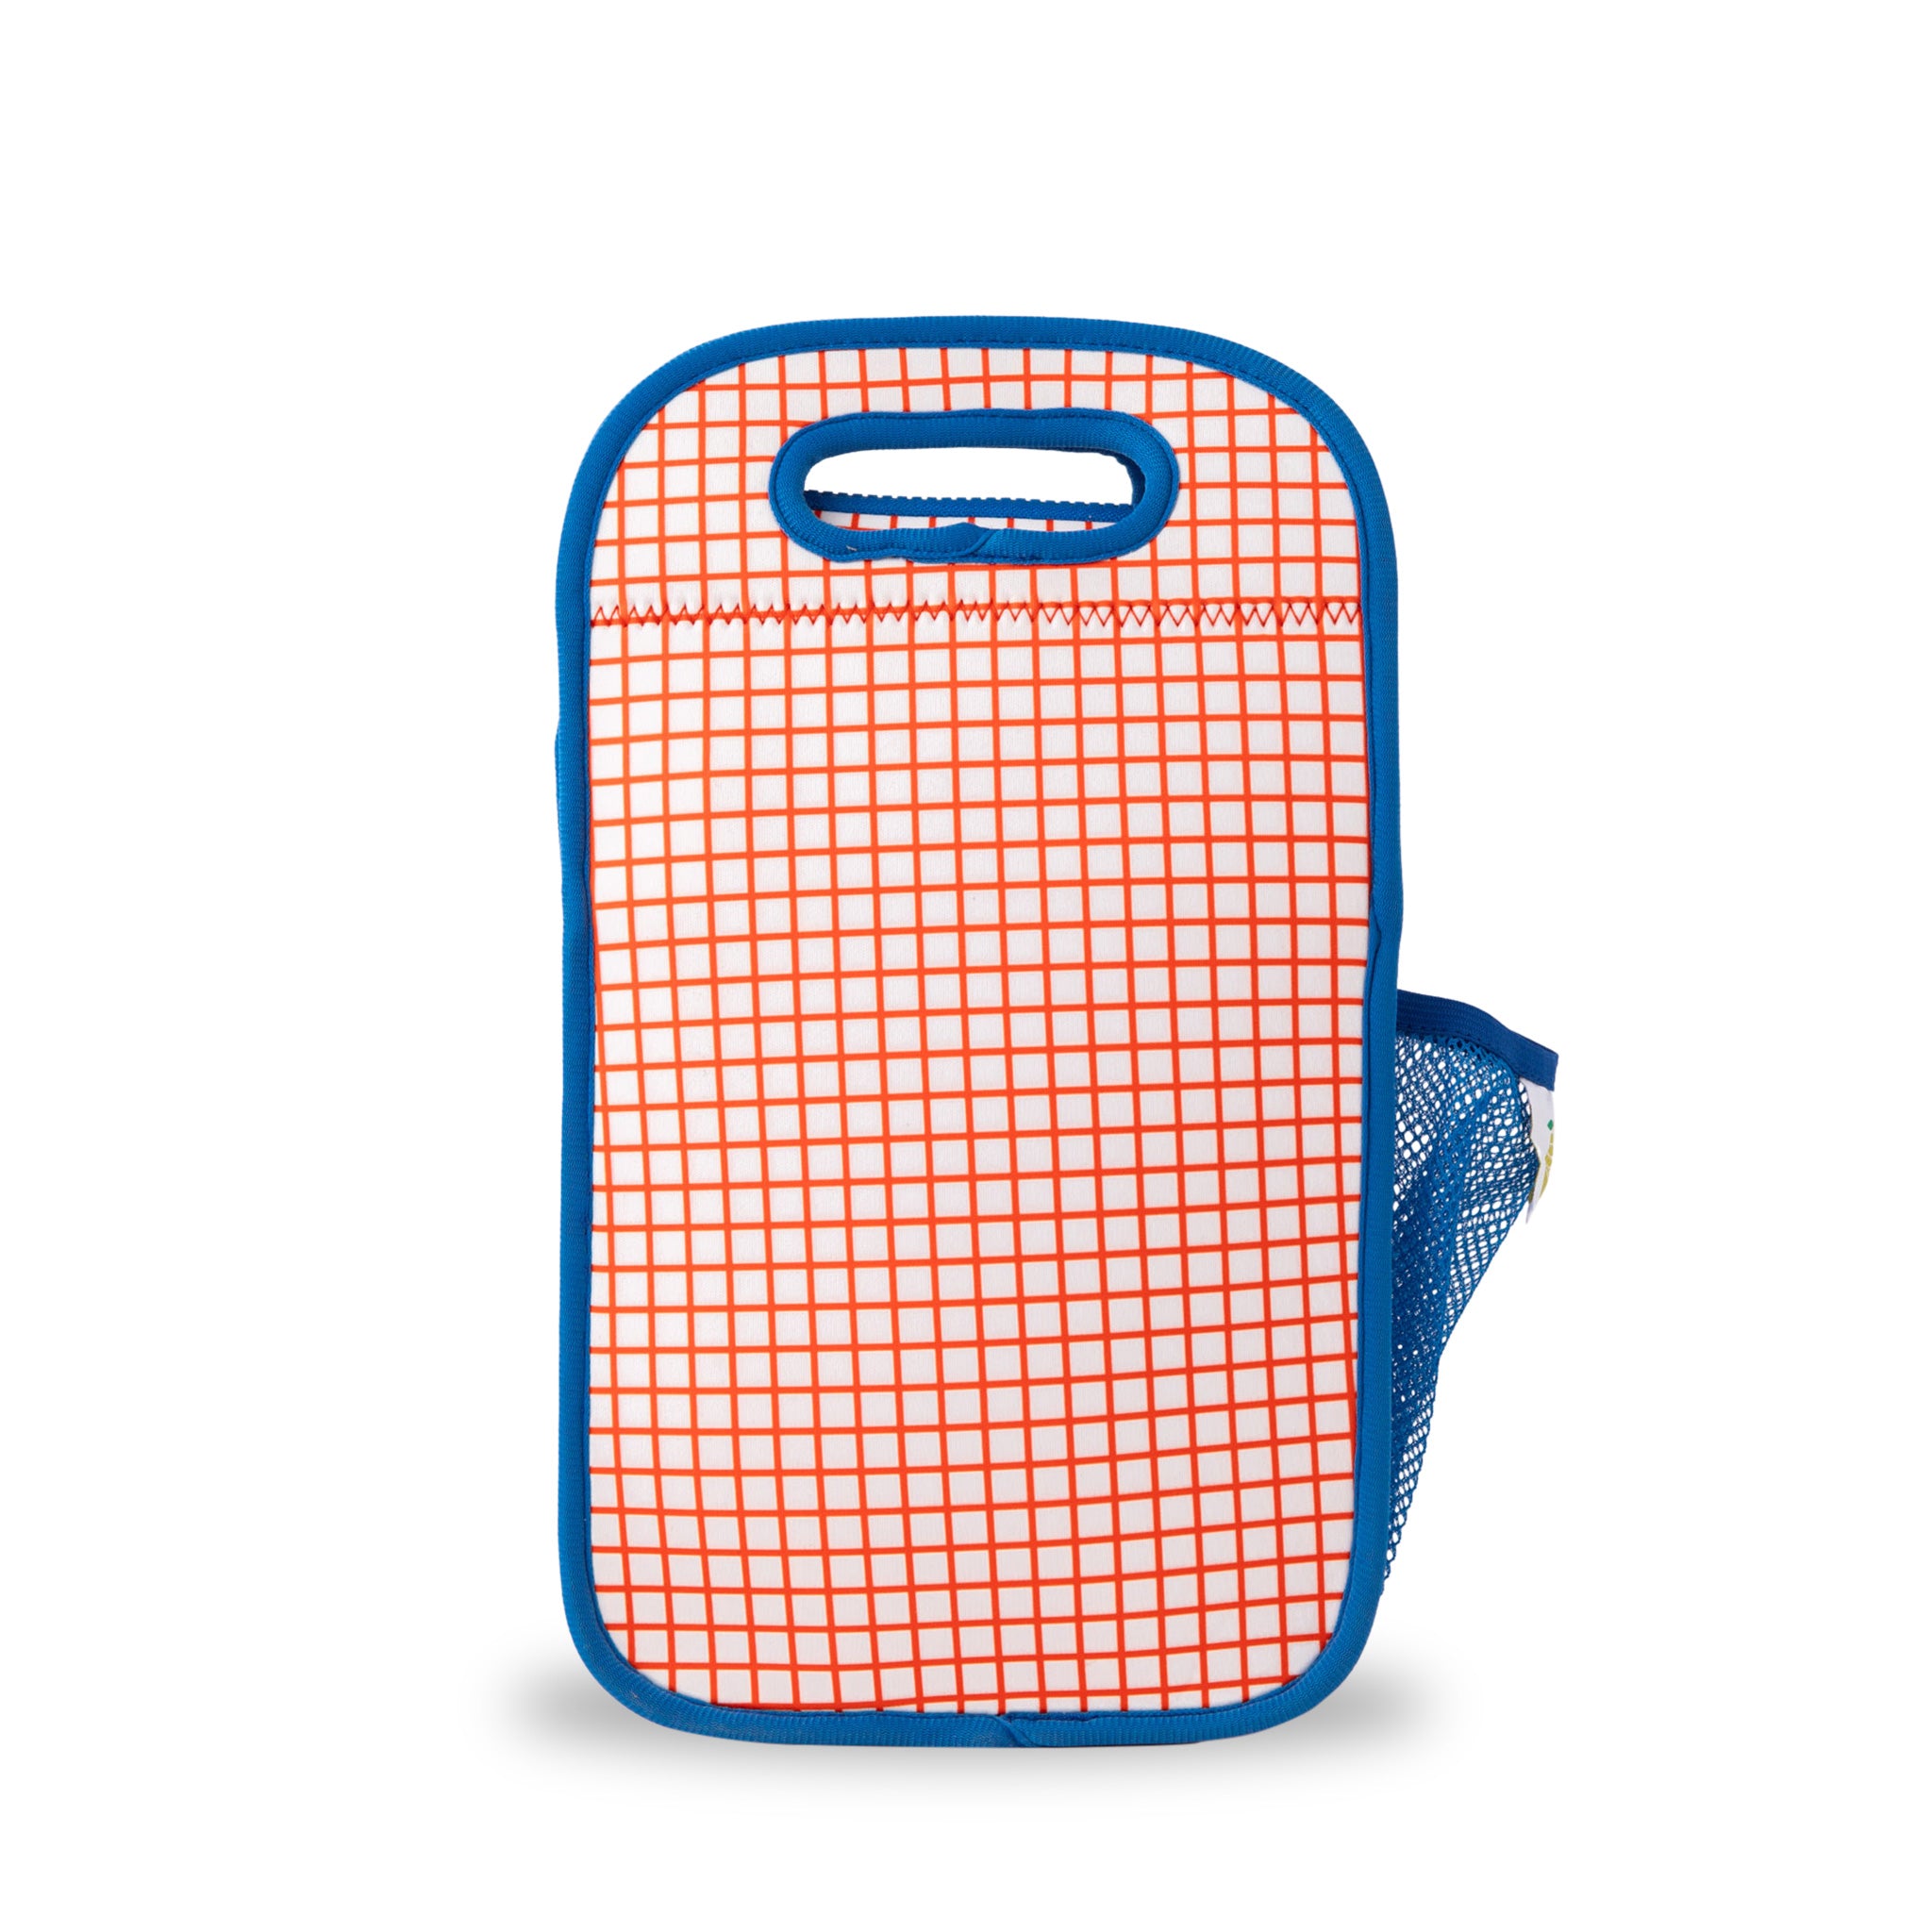 neoprene insulated lunch bag bright orange grid pattern and bright blue binding - nudie rudie lunch box